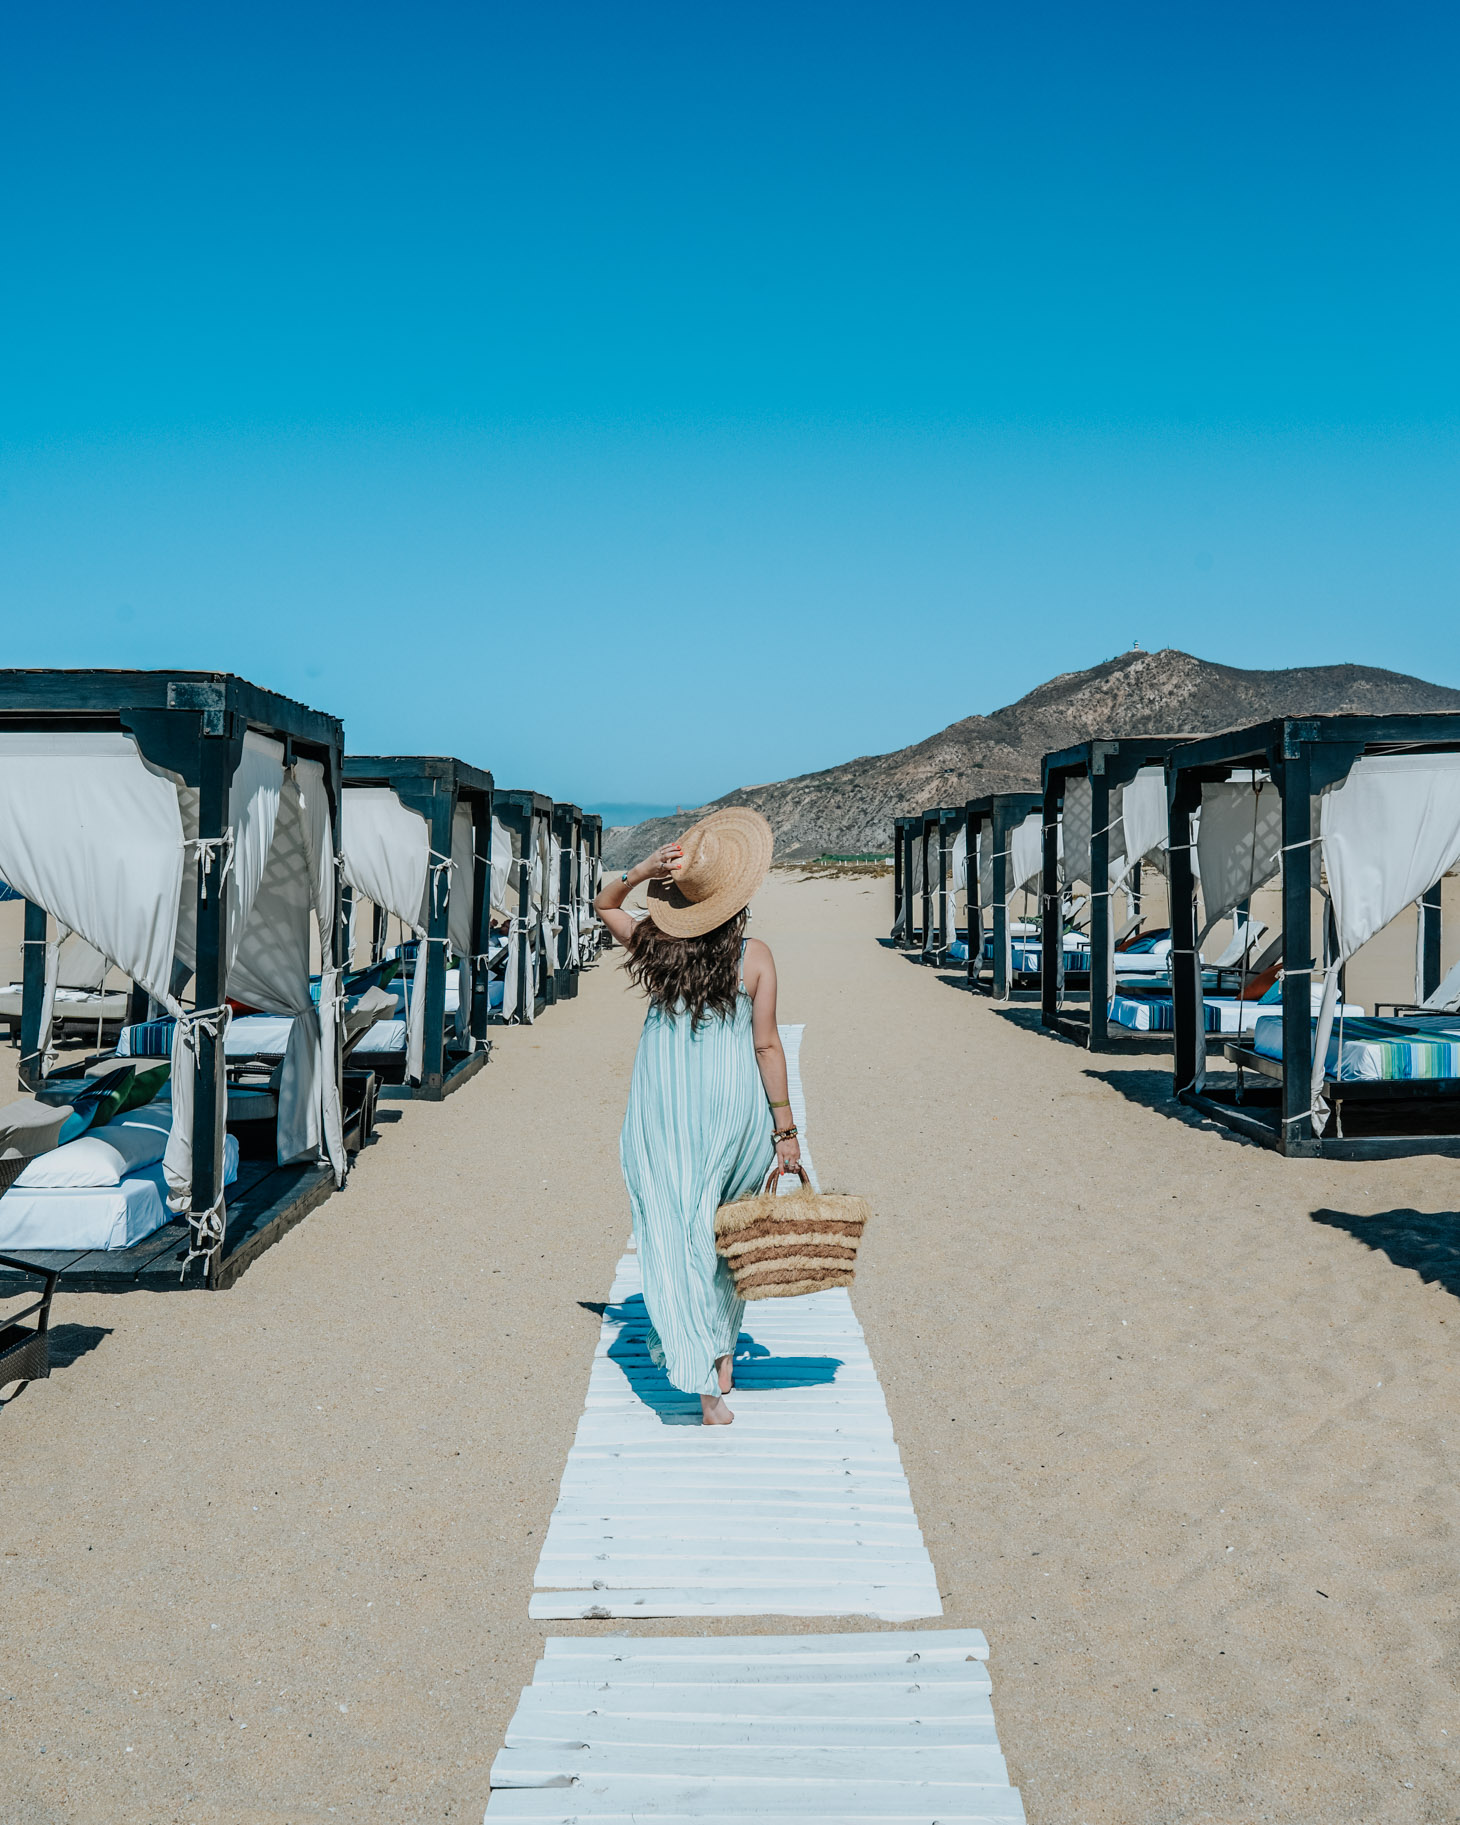 Pueblo Bonito Pacifica: 8 Reasons to Vacation in Cabo by popular Tennessee travel blog, Lone Star Looking Glass: image of a woman walking by beach cabanas at the Pueblo Bonito Pacifica.